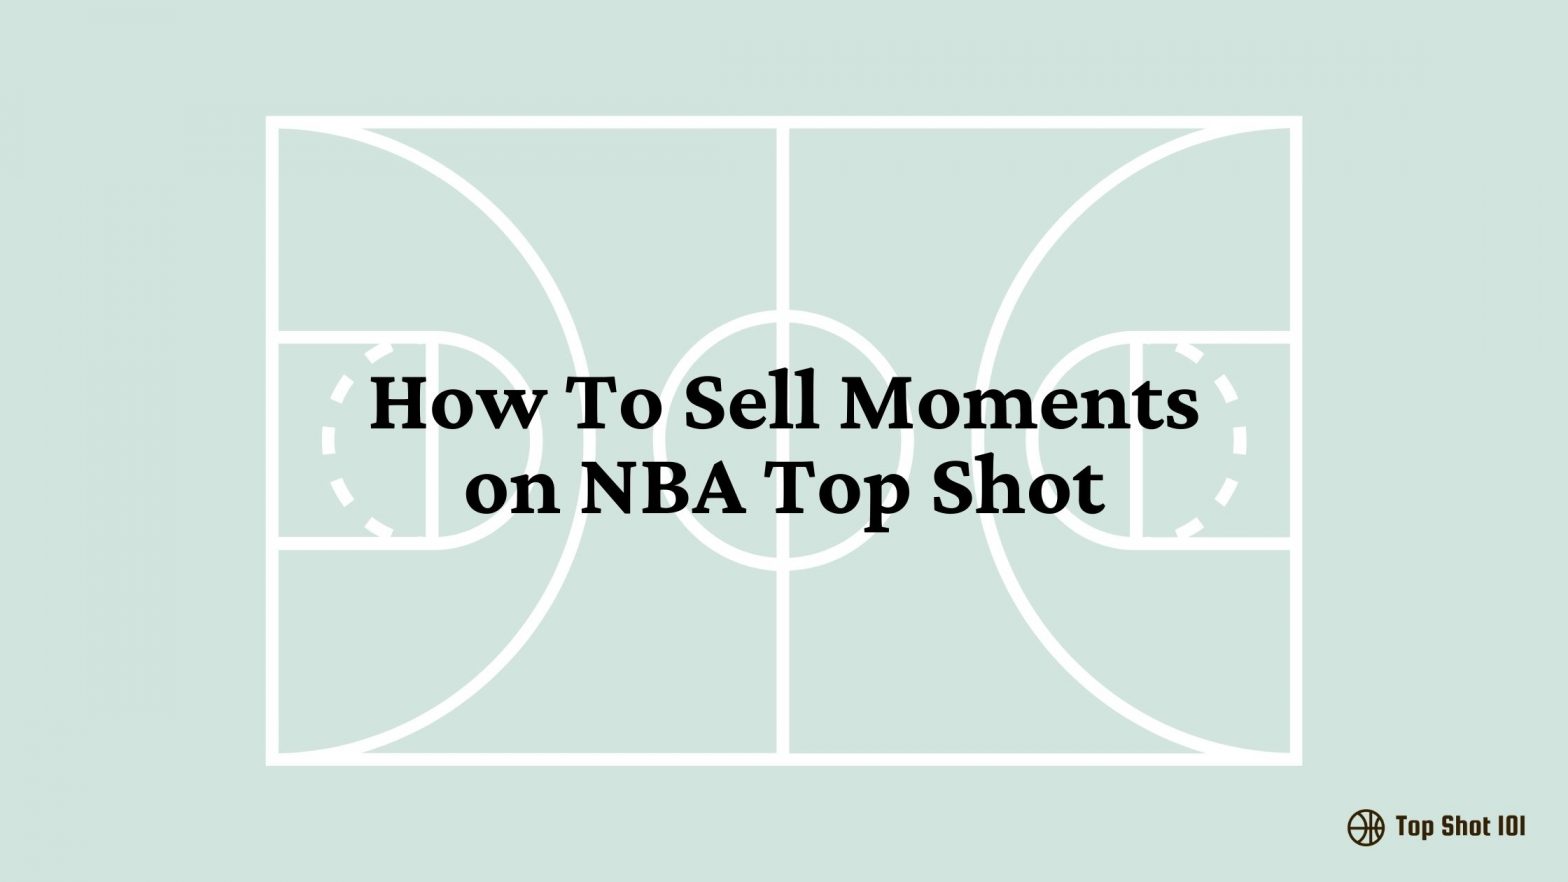 How To Sell Moments on NBA Top Shot